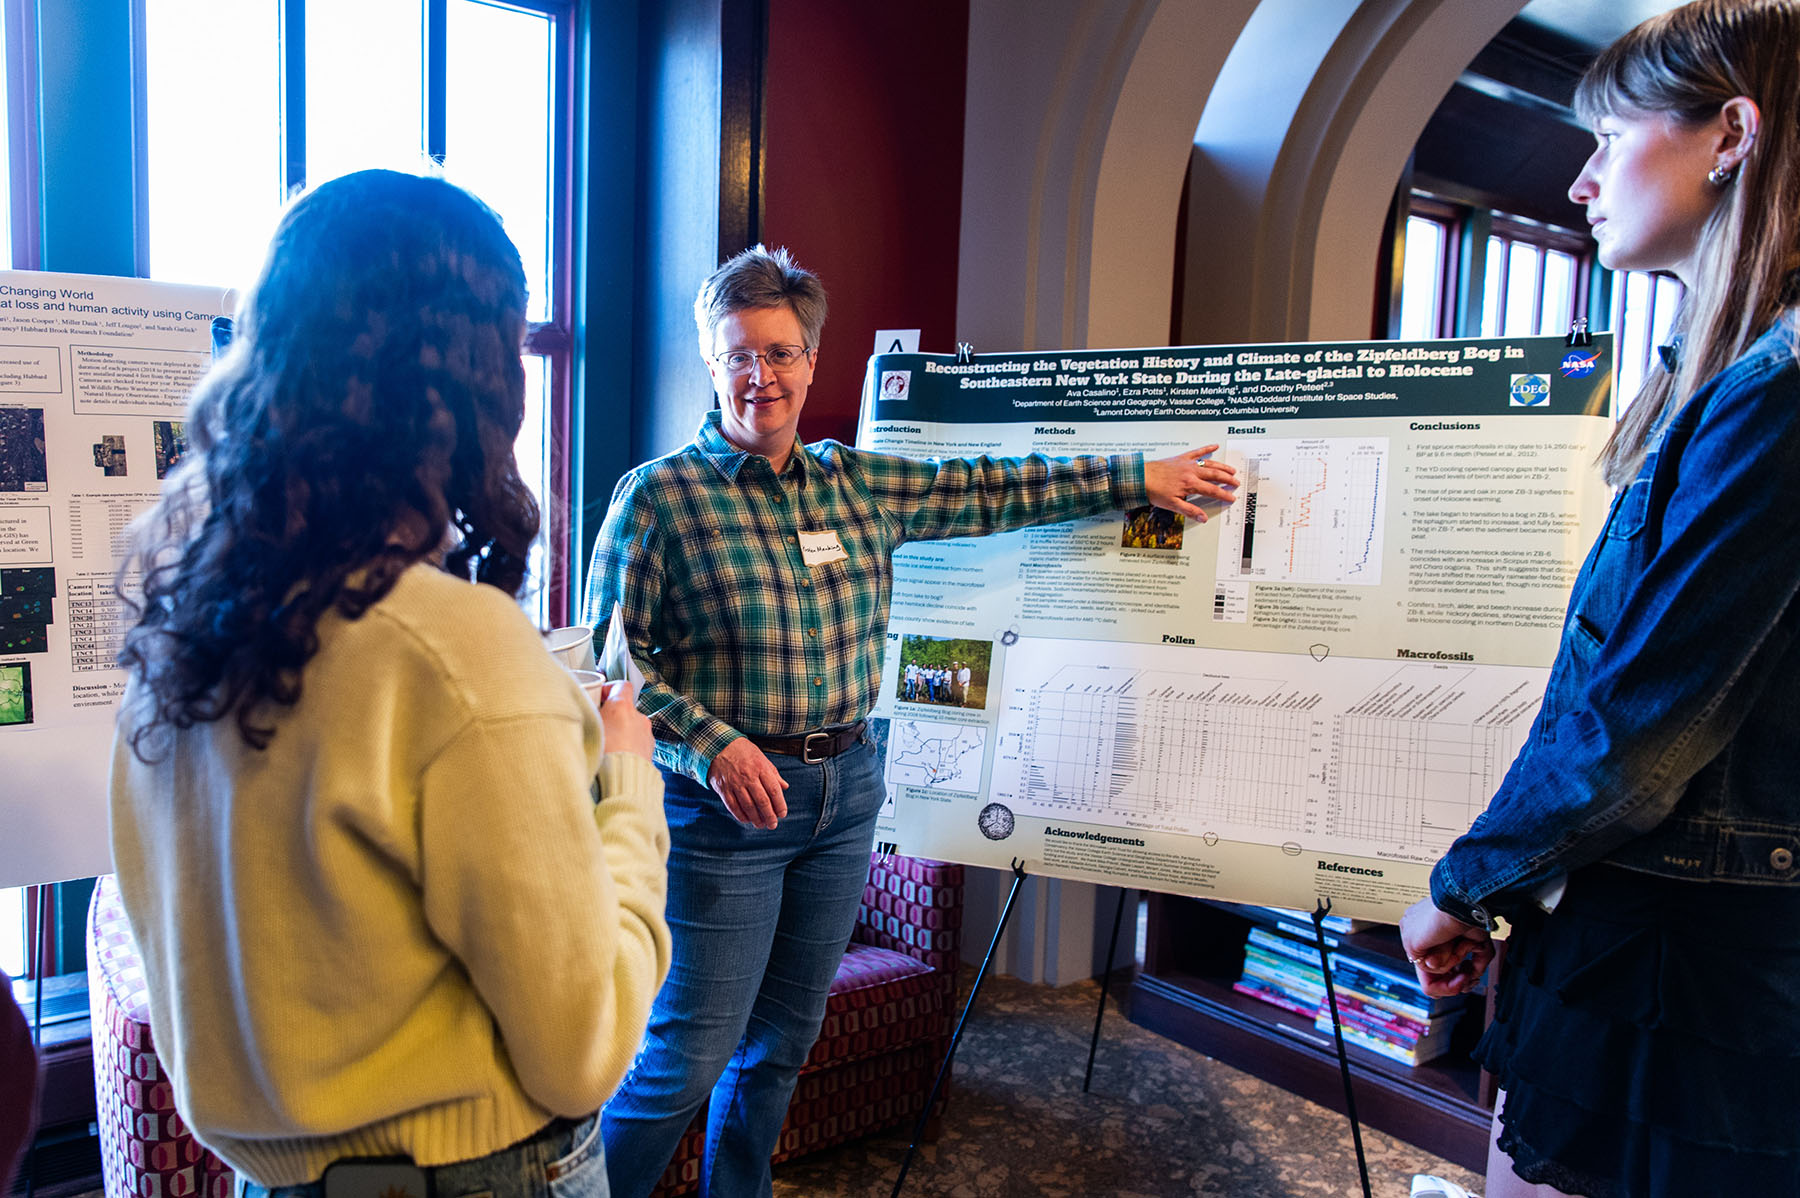 Person in a flannel shirt and jeans is pointing to a poster presentation on an easel while another person looks on.